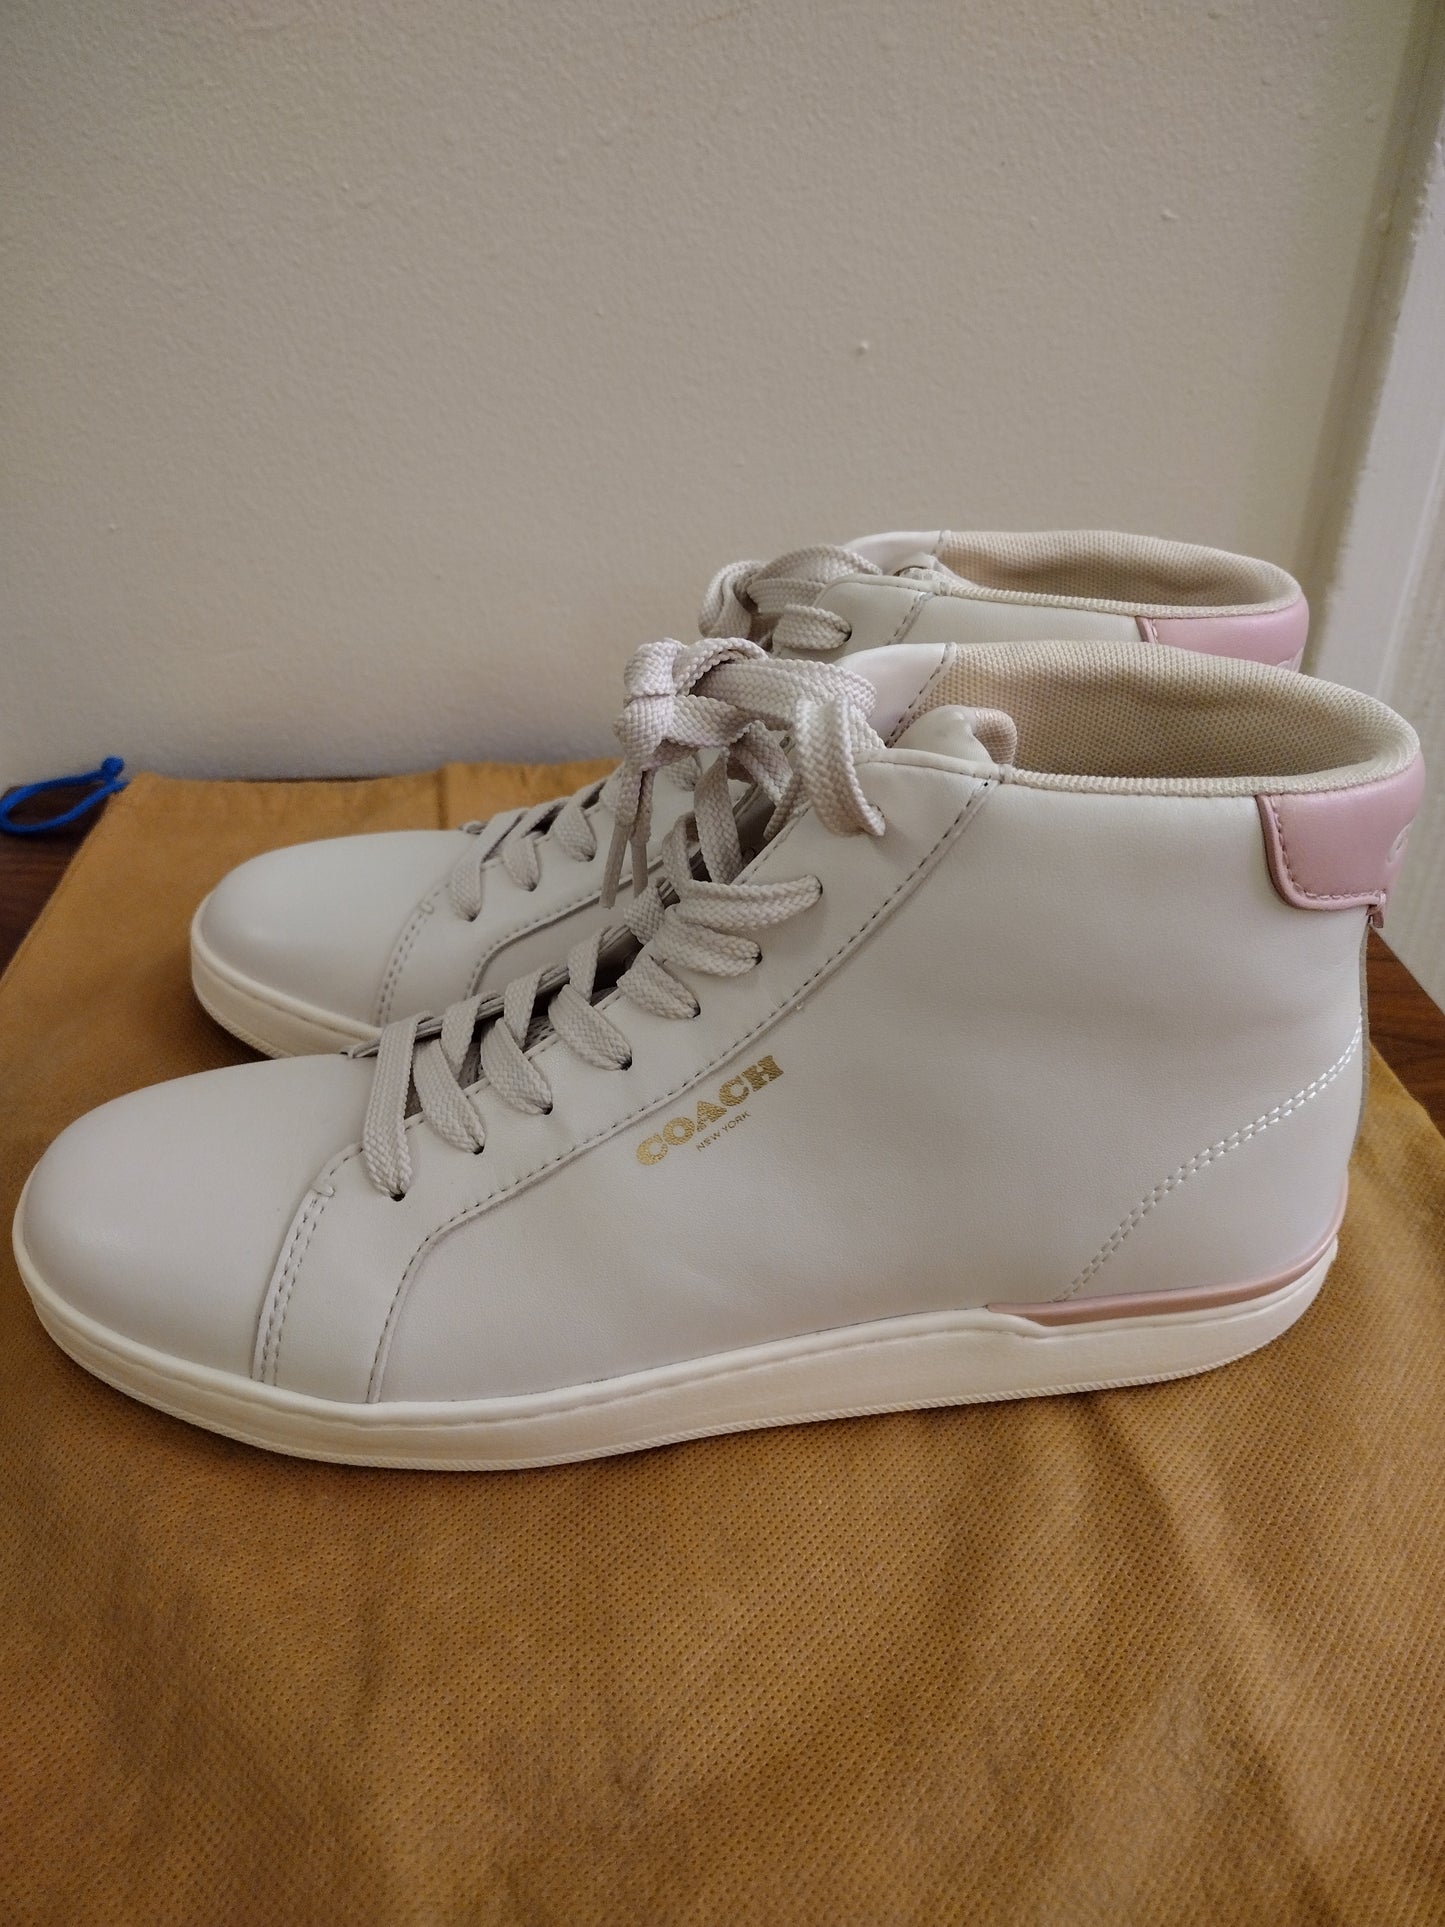 COACH Clip Leather High Top Sneakers - Wmns 9.5